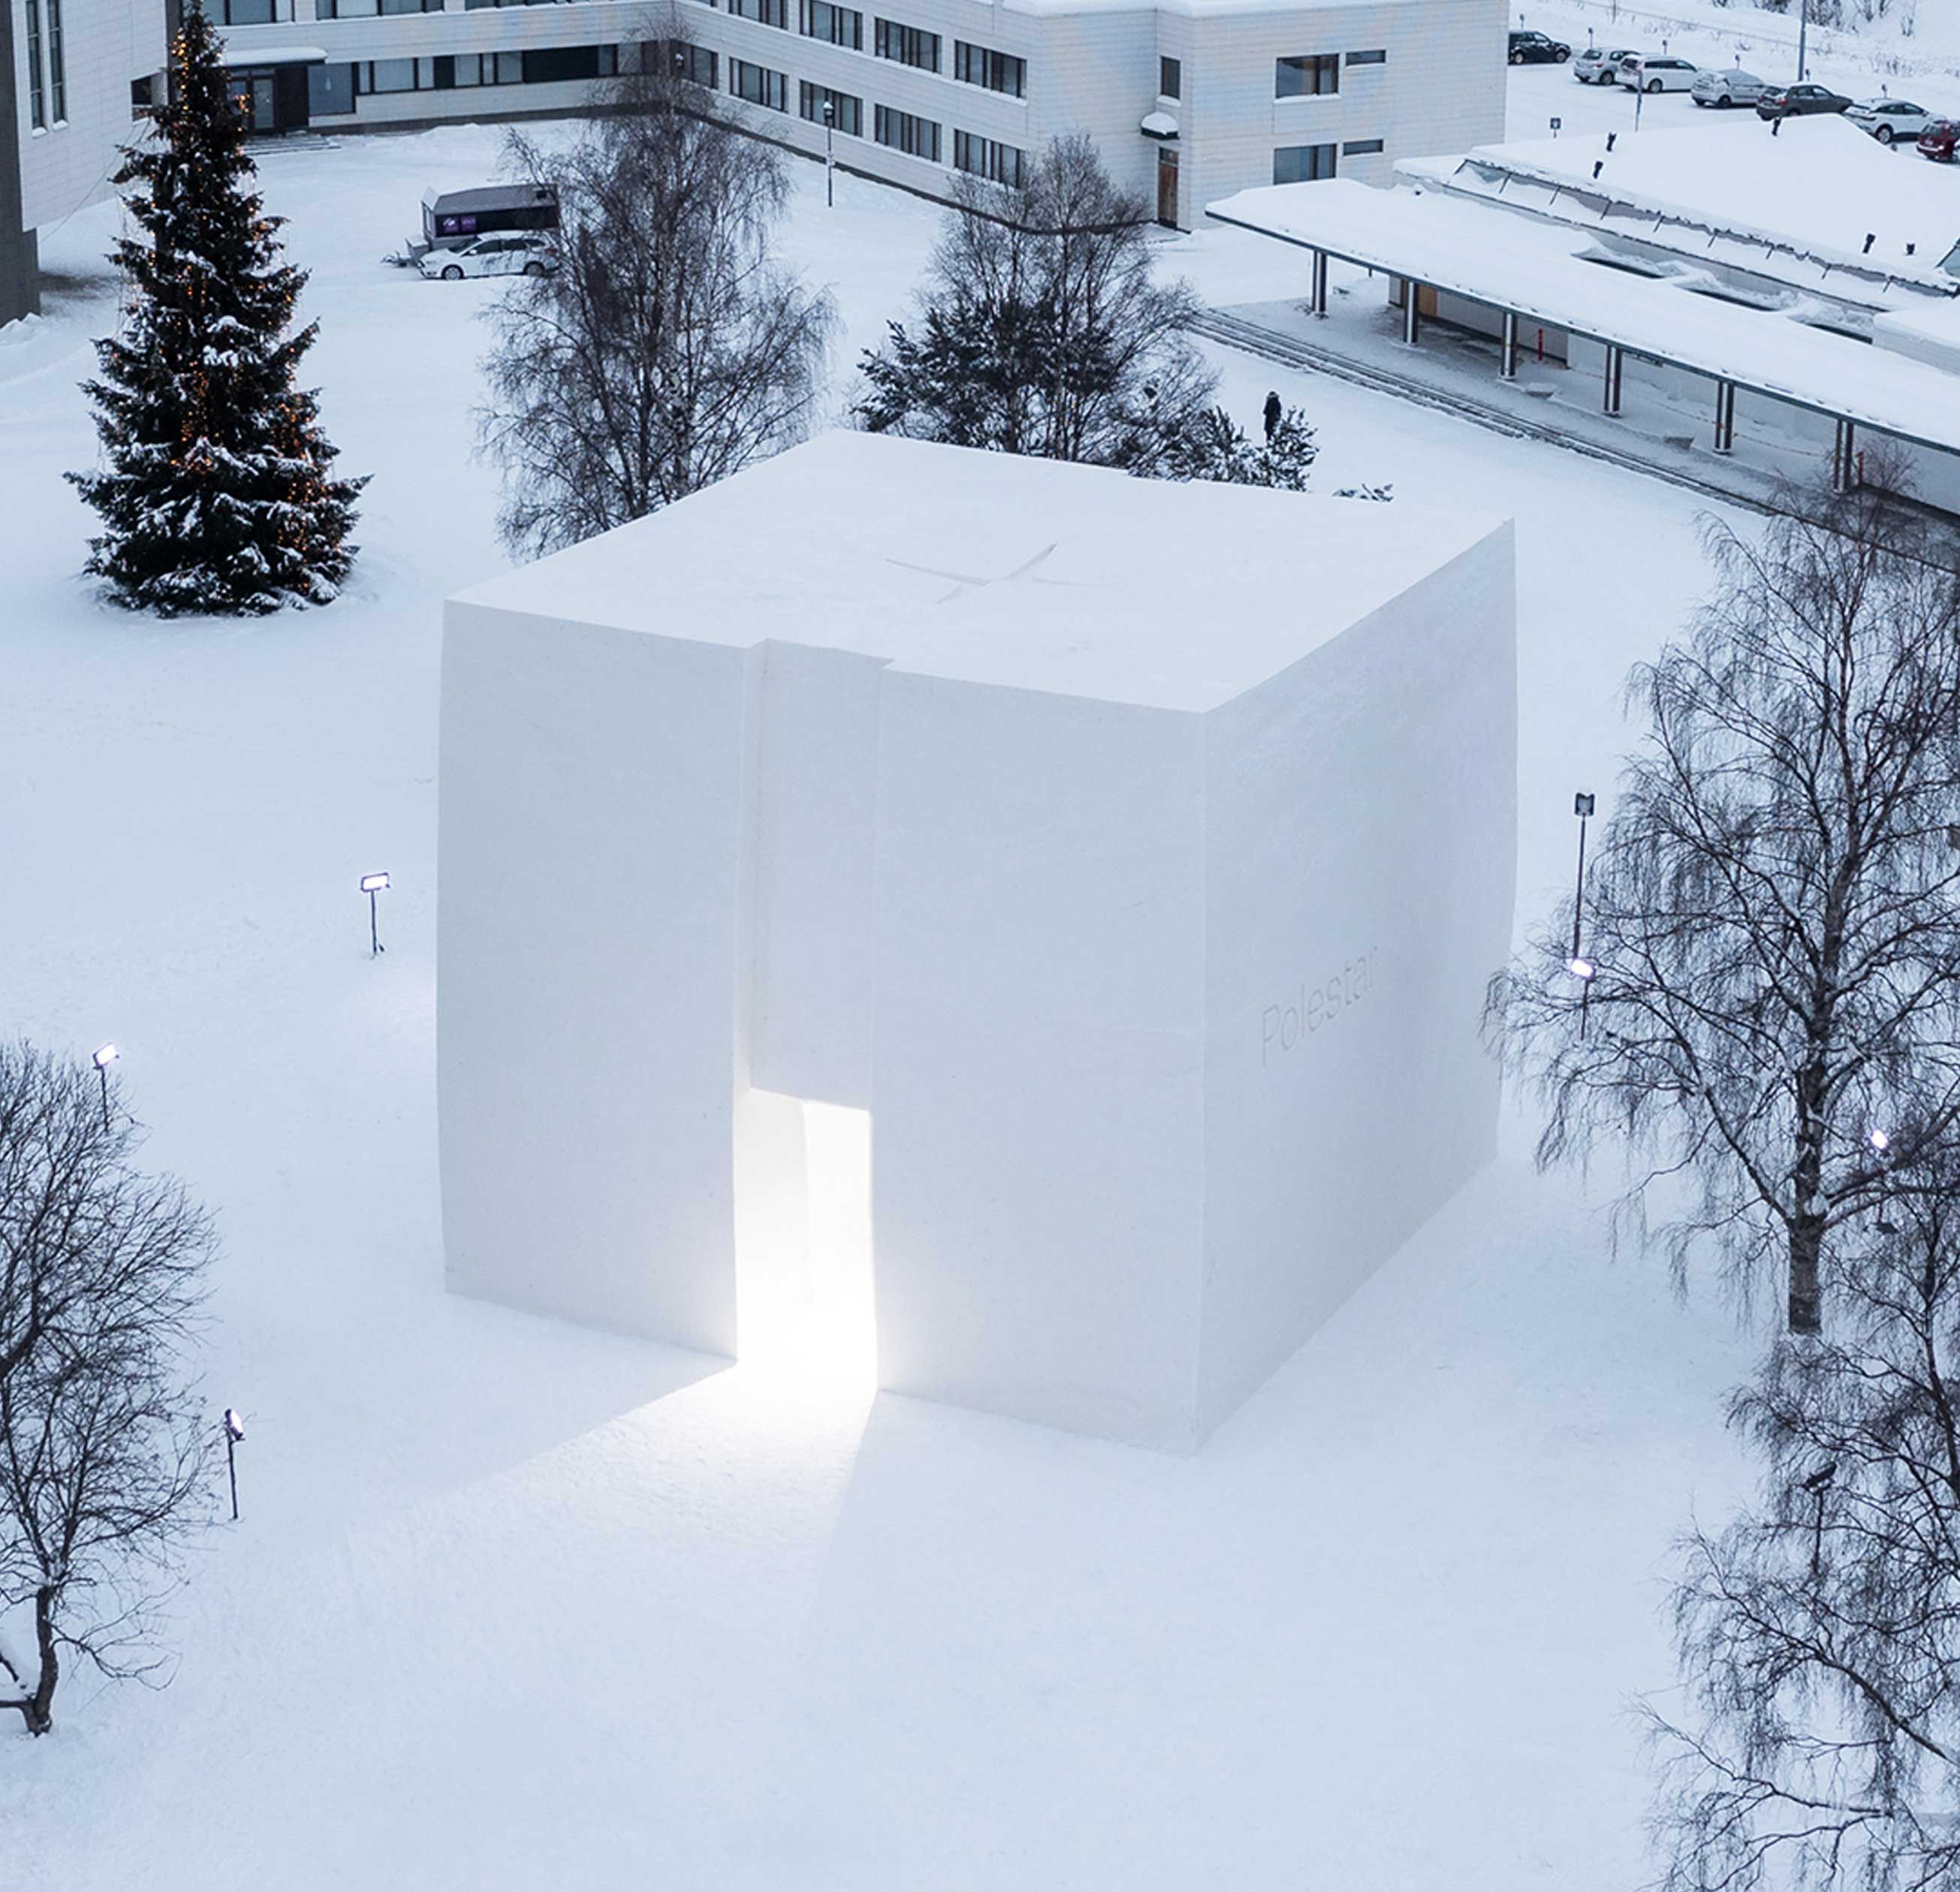 Giant Polestar car showroom entirely made of snow